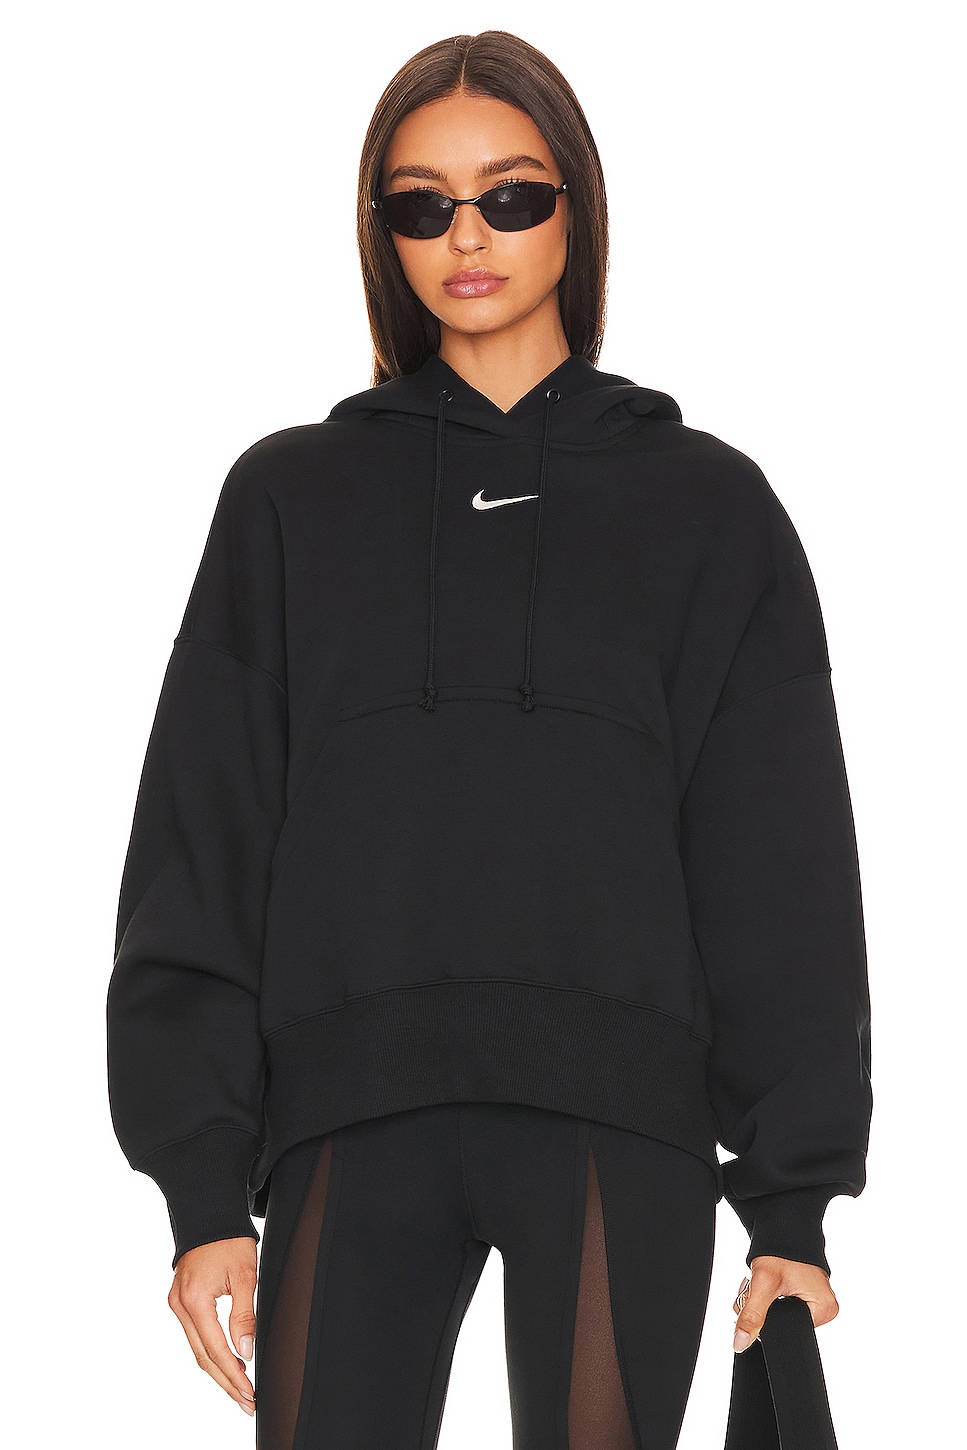 Image 1 of Over-oversized Pullover Hoodie in Black & Sail